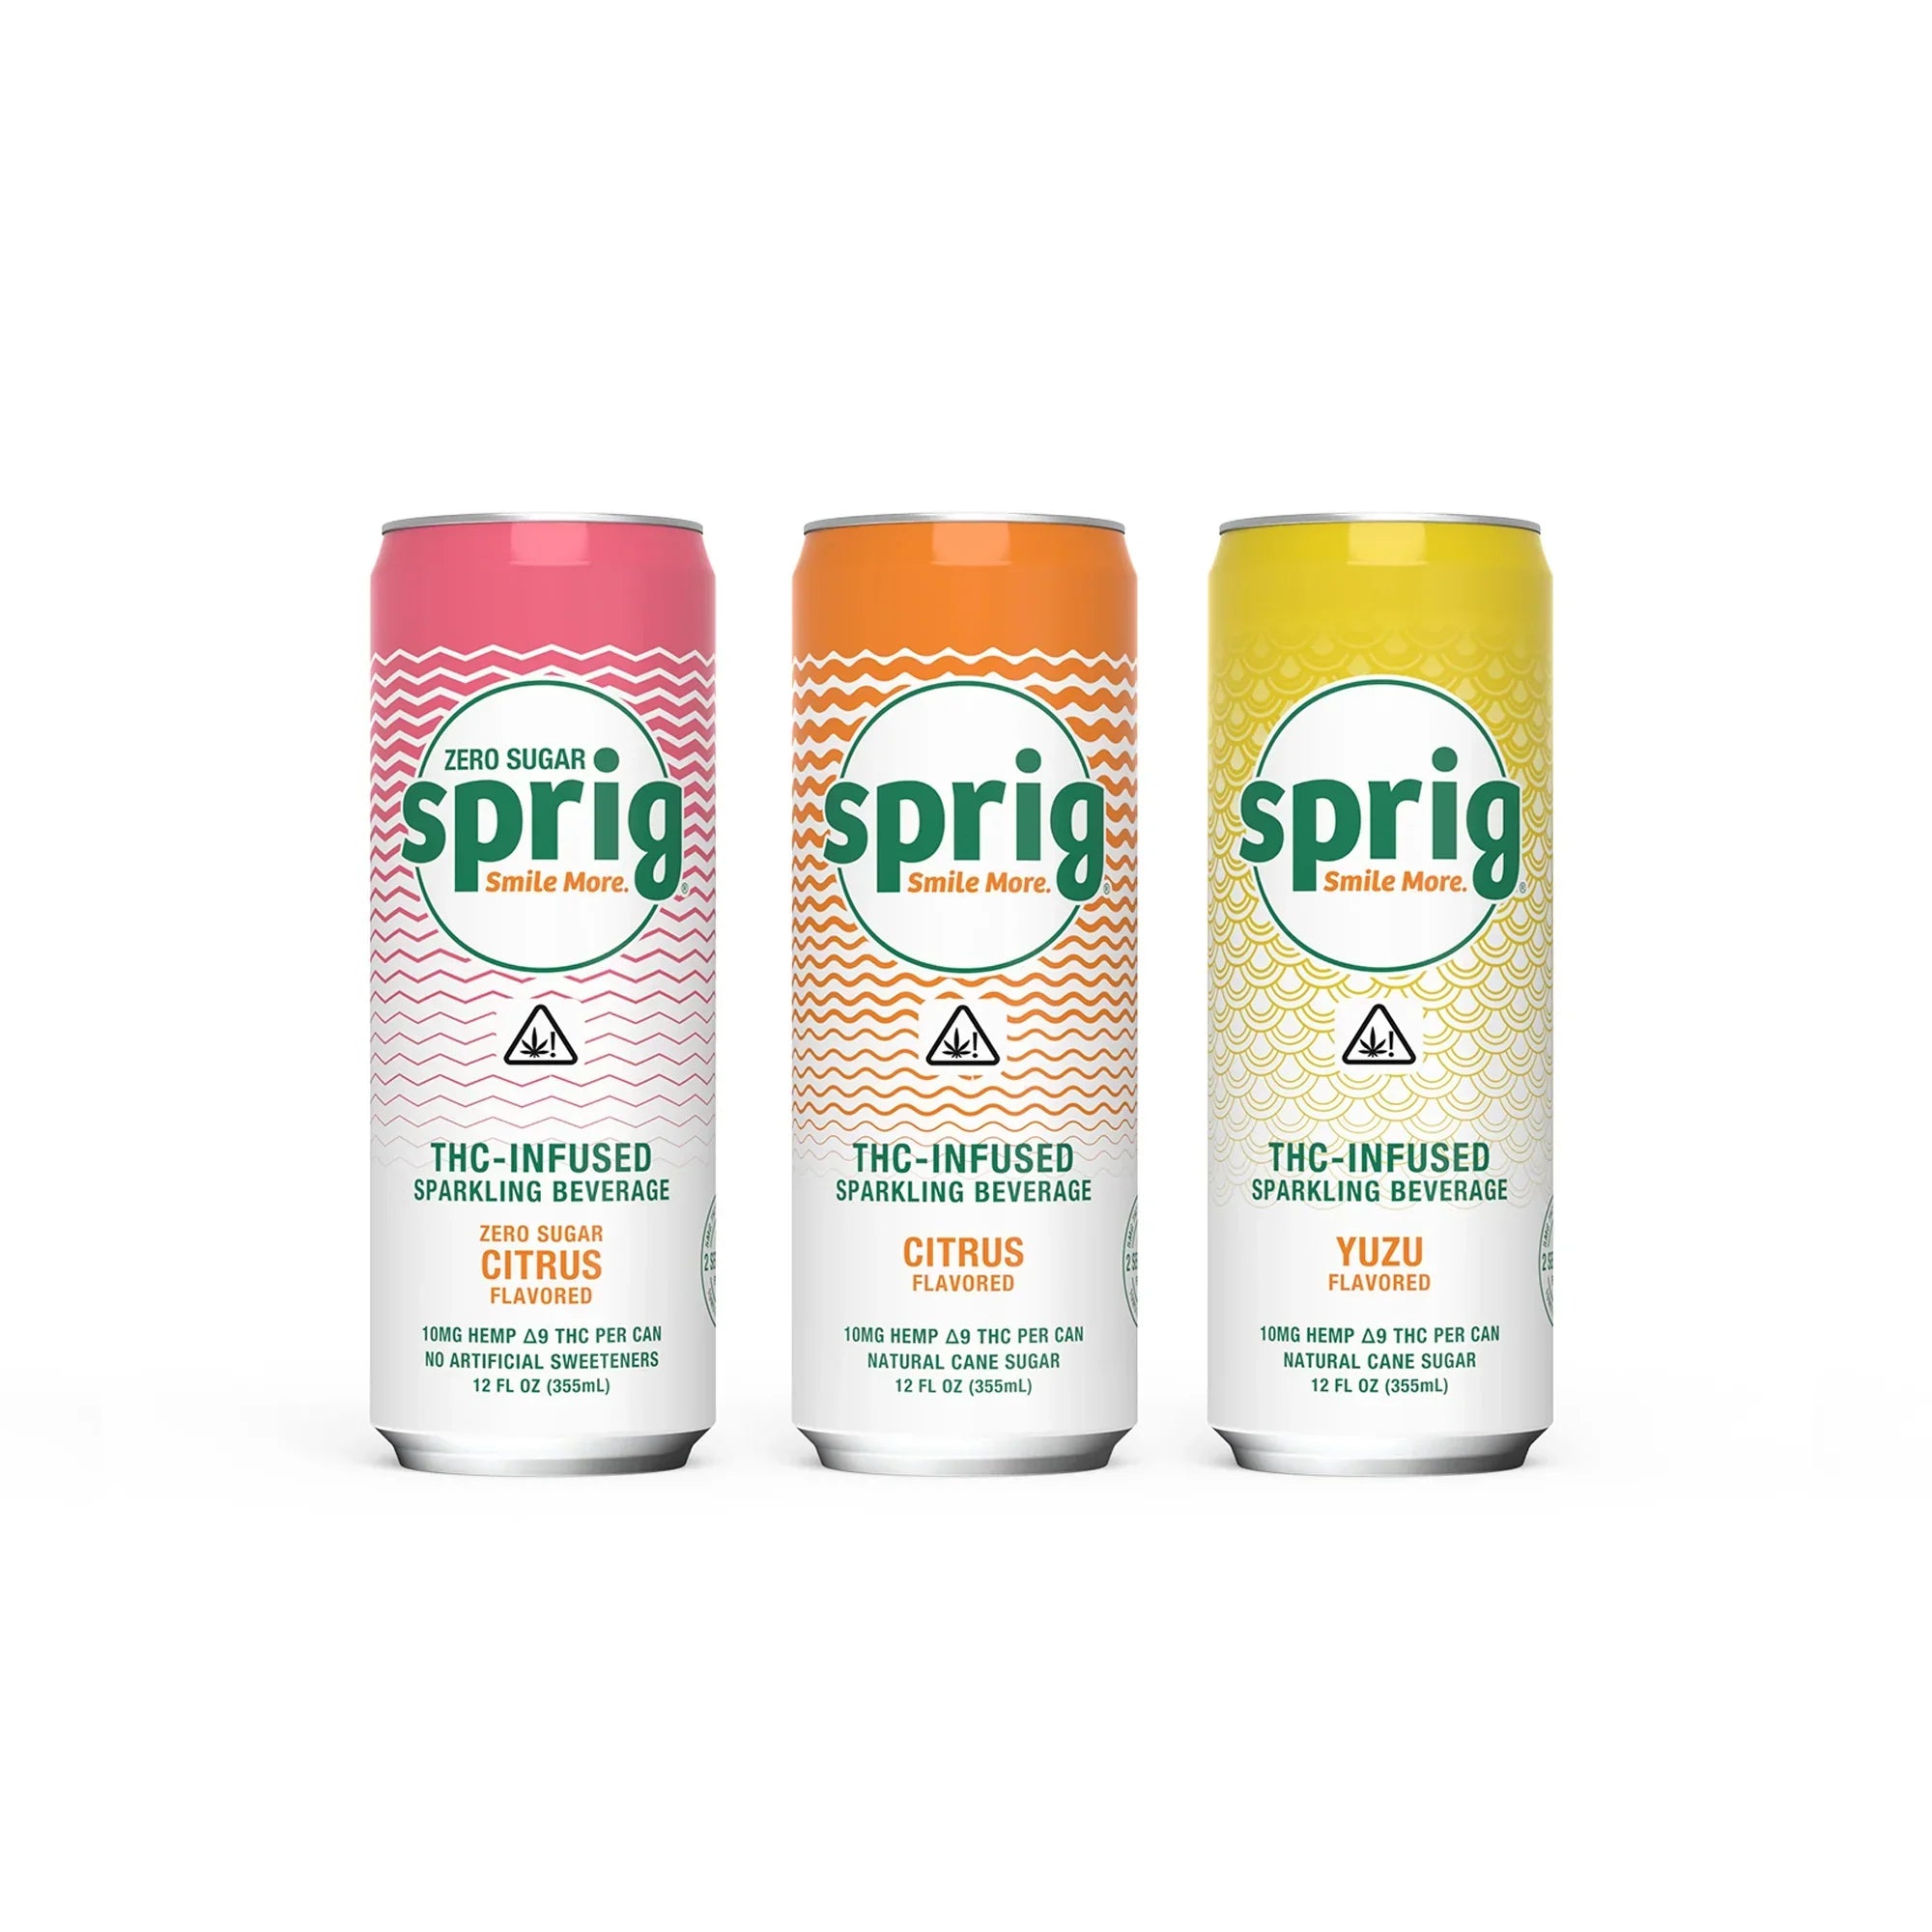 Sprig Classic THC 9 Drinks 6 Pack - 24 Pack Best Price